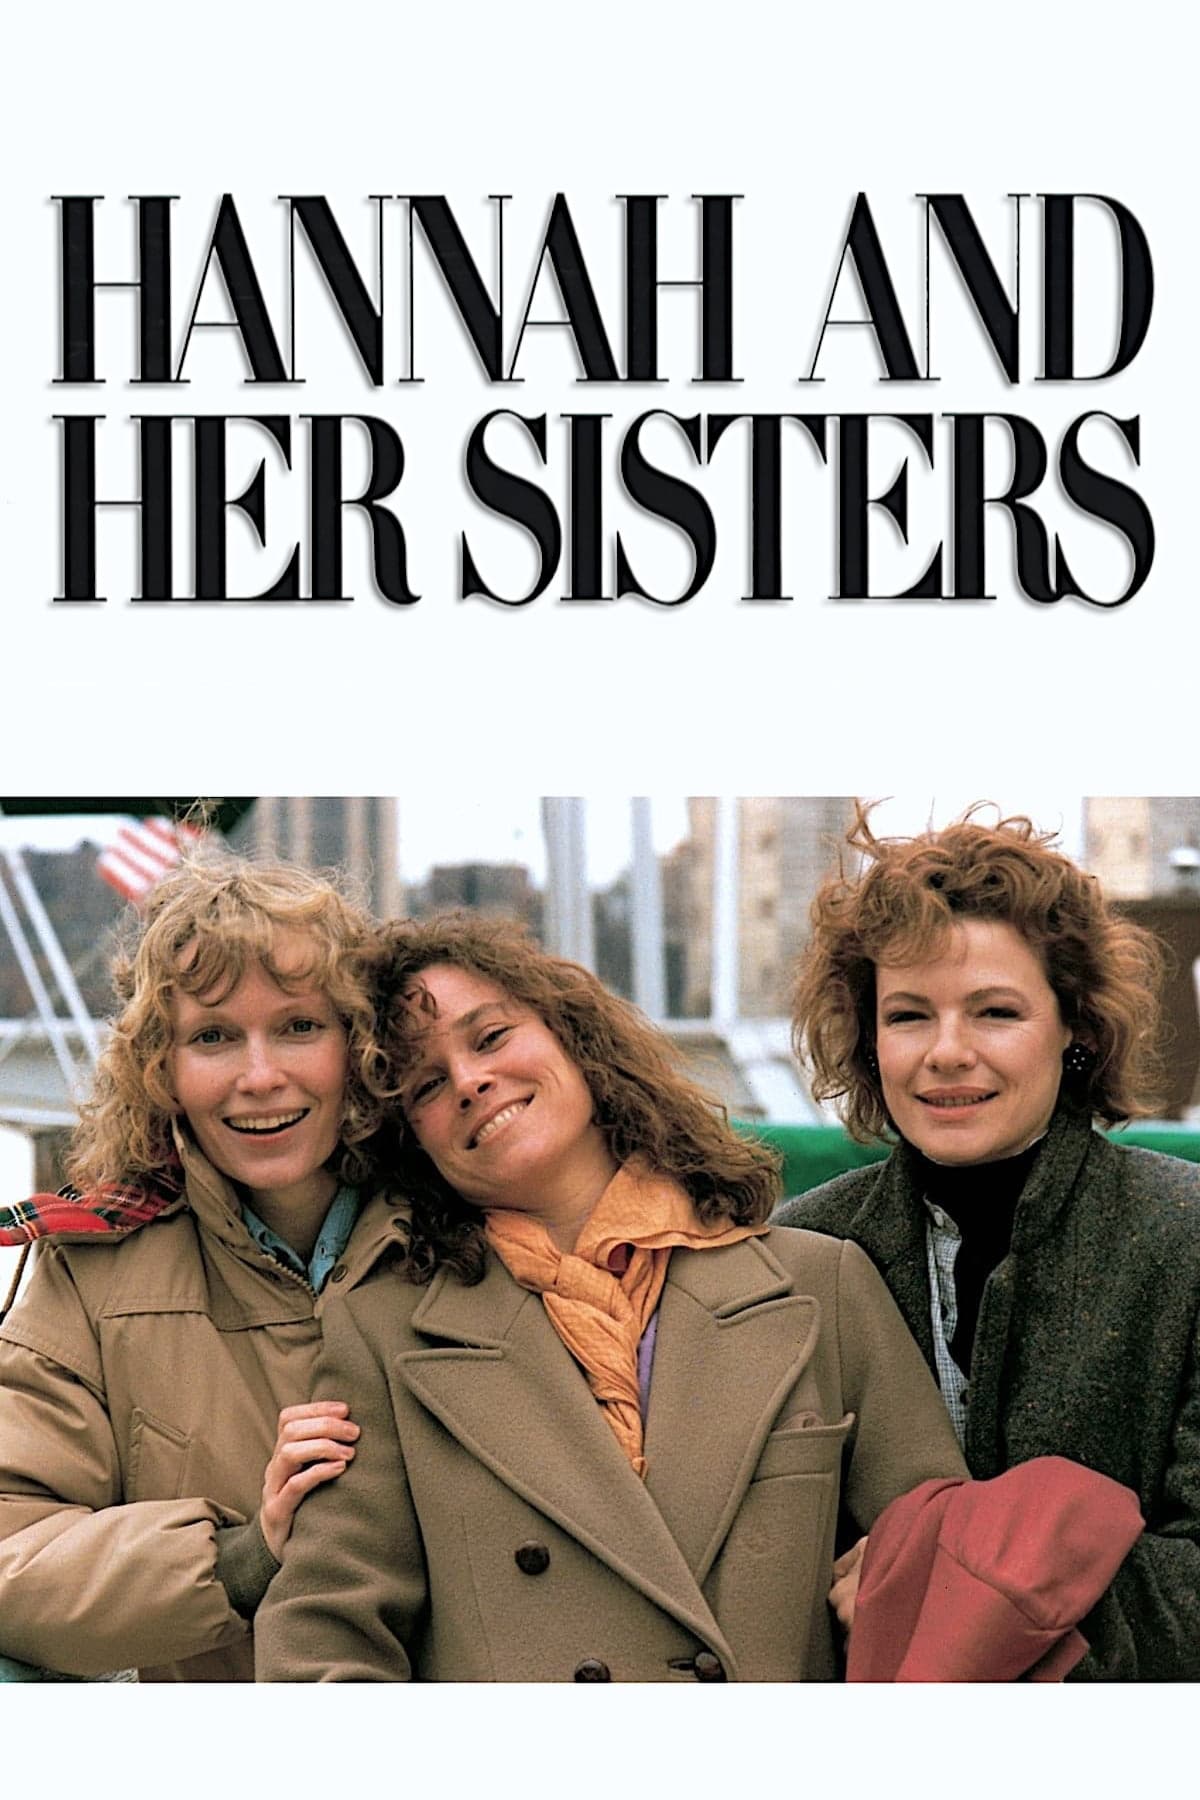 Hannah and Her Sisters